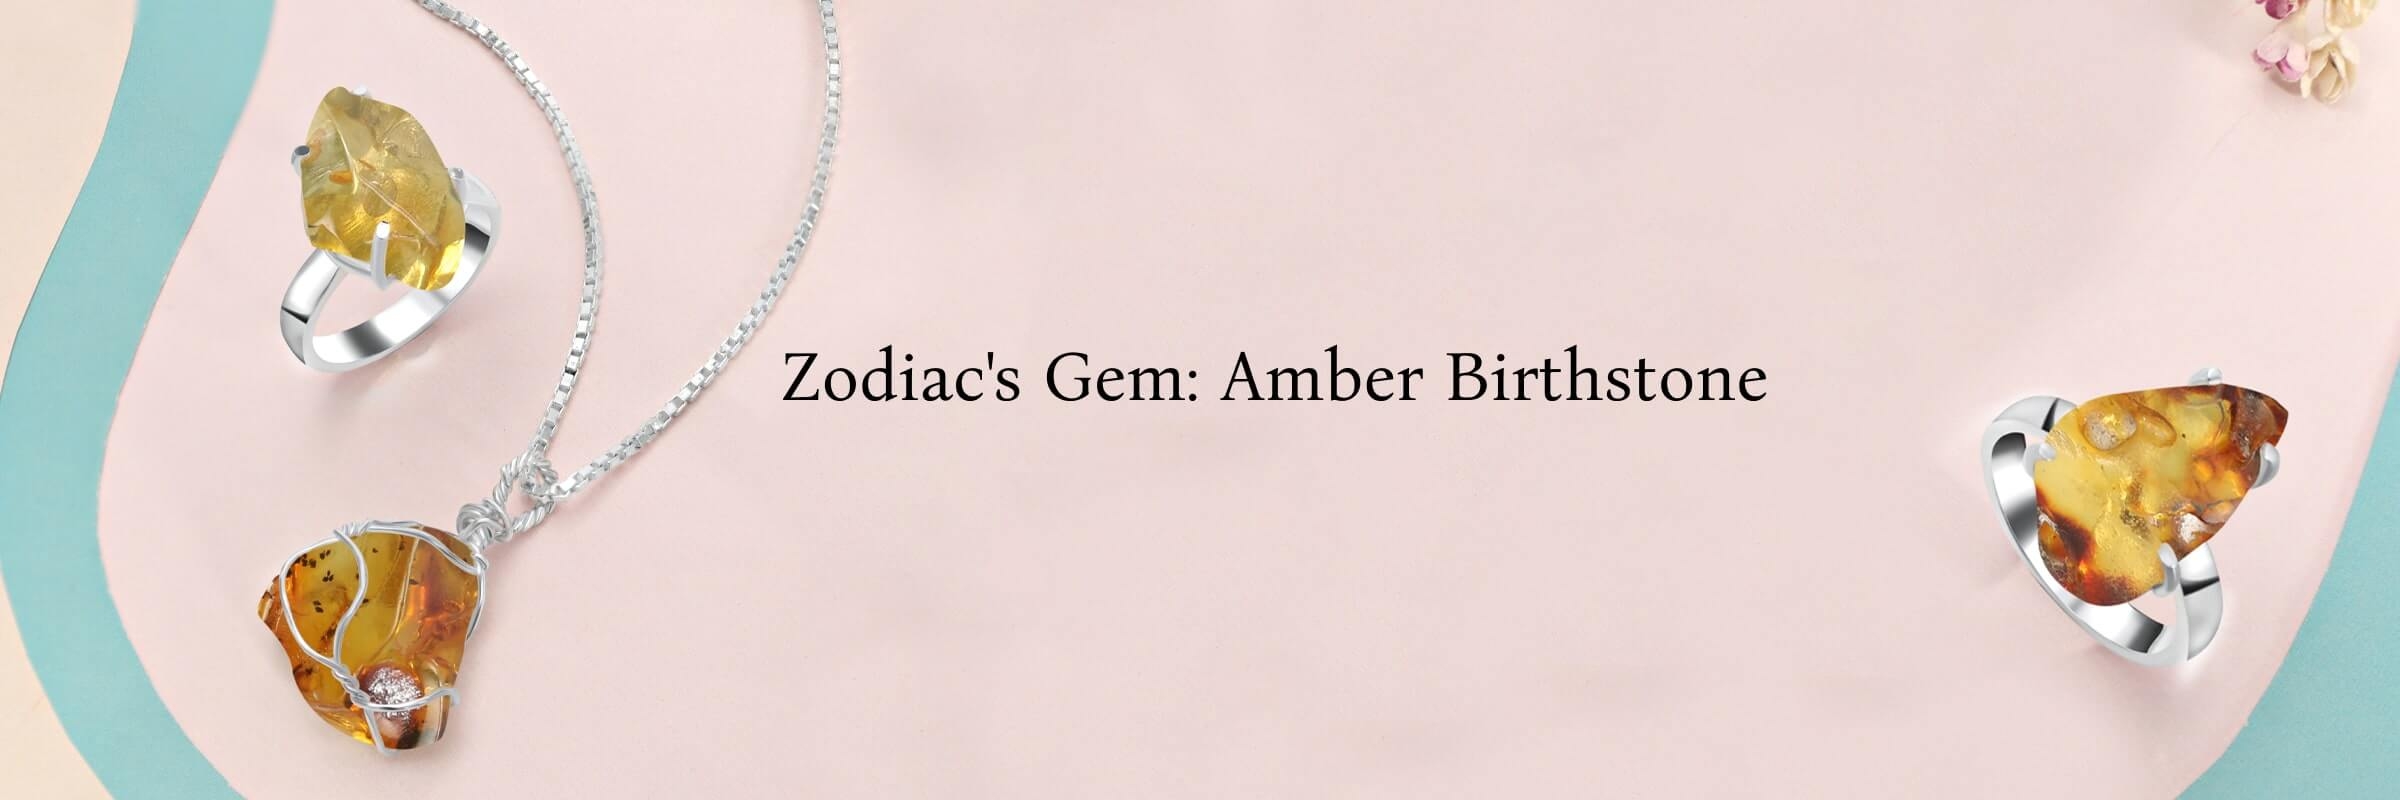 Amber is The Birthstone Jewelry of Which Zodiac Sign